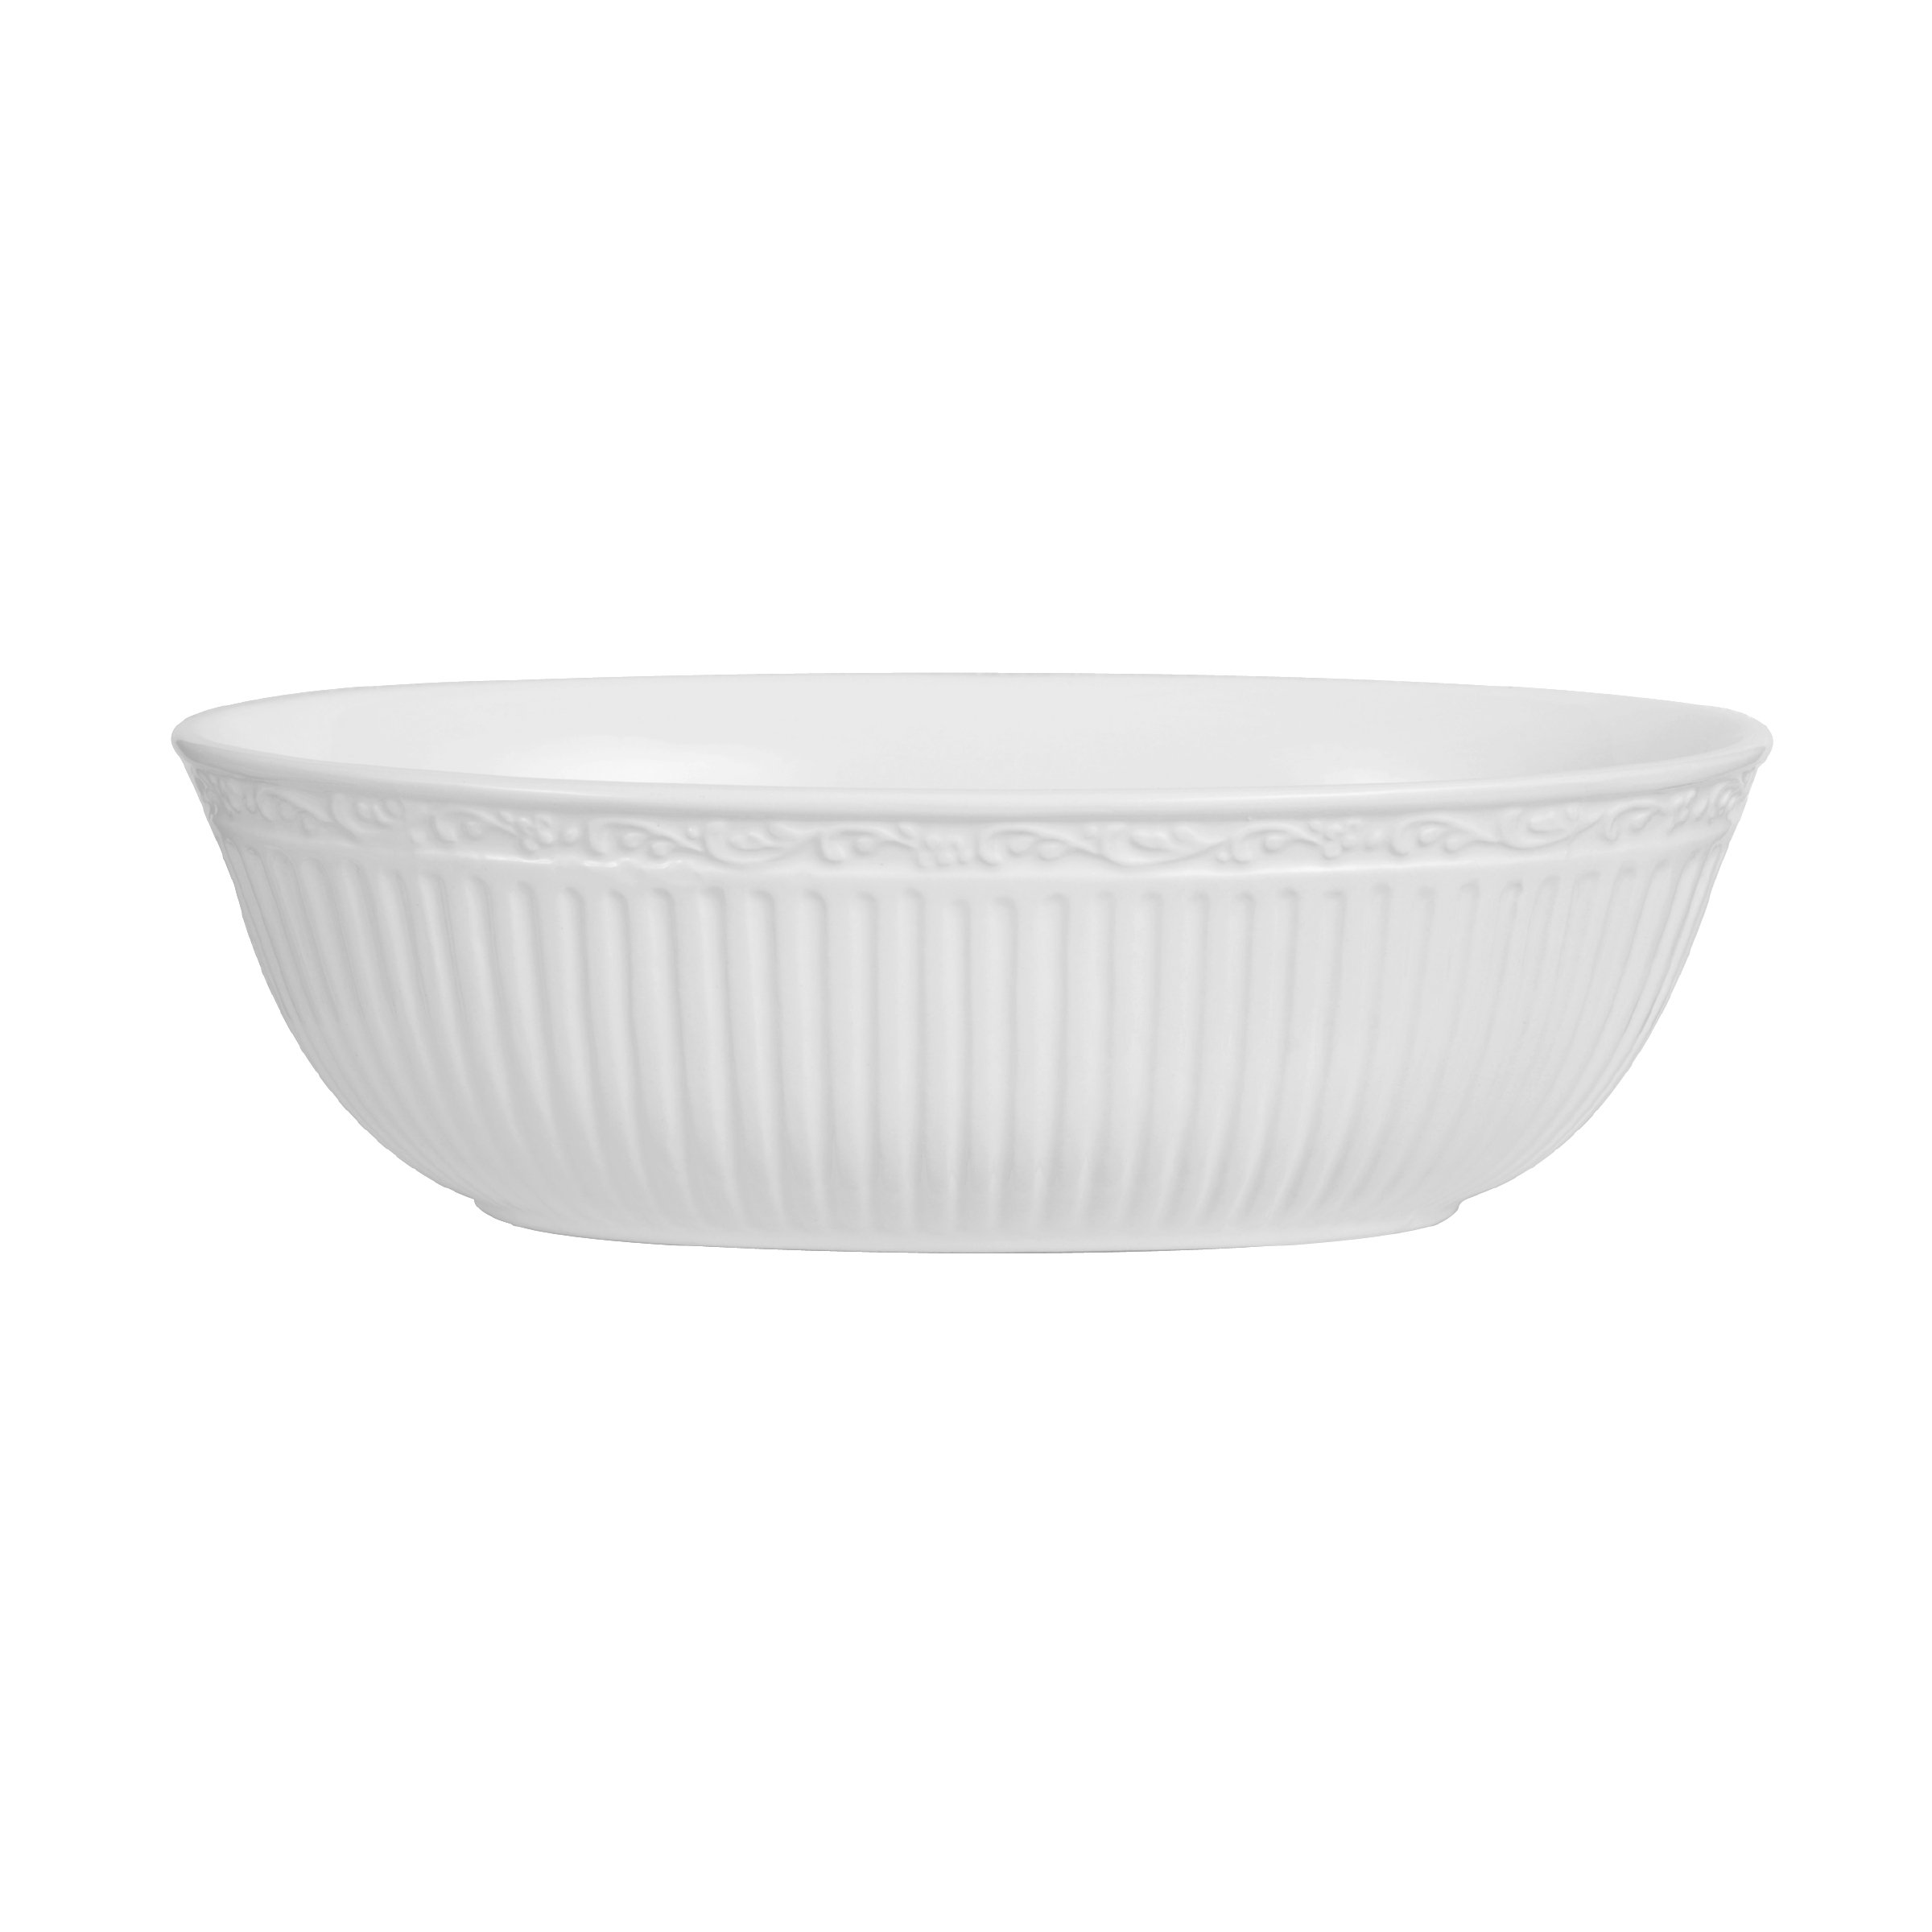 Mikasa Italian Countryside Oval Serving Bowl, 10.5-Inch